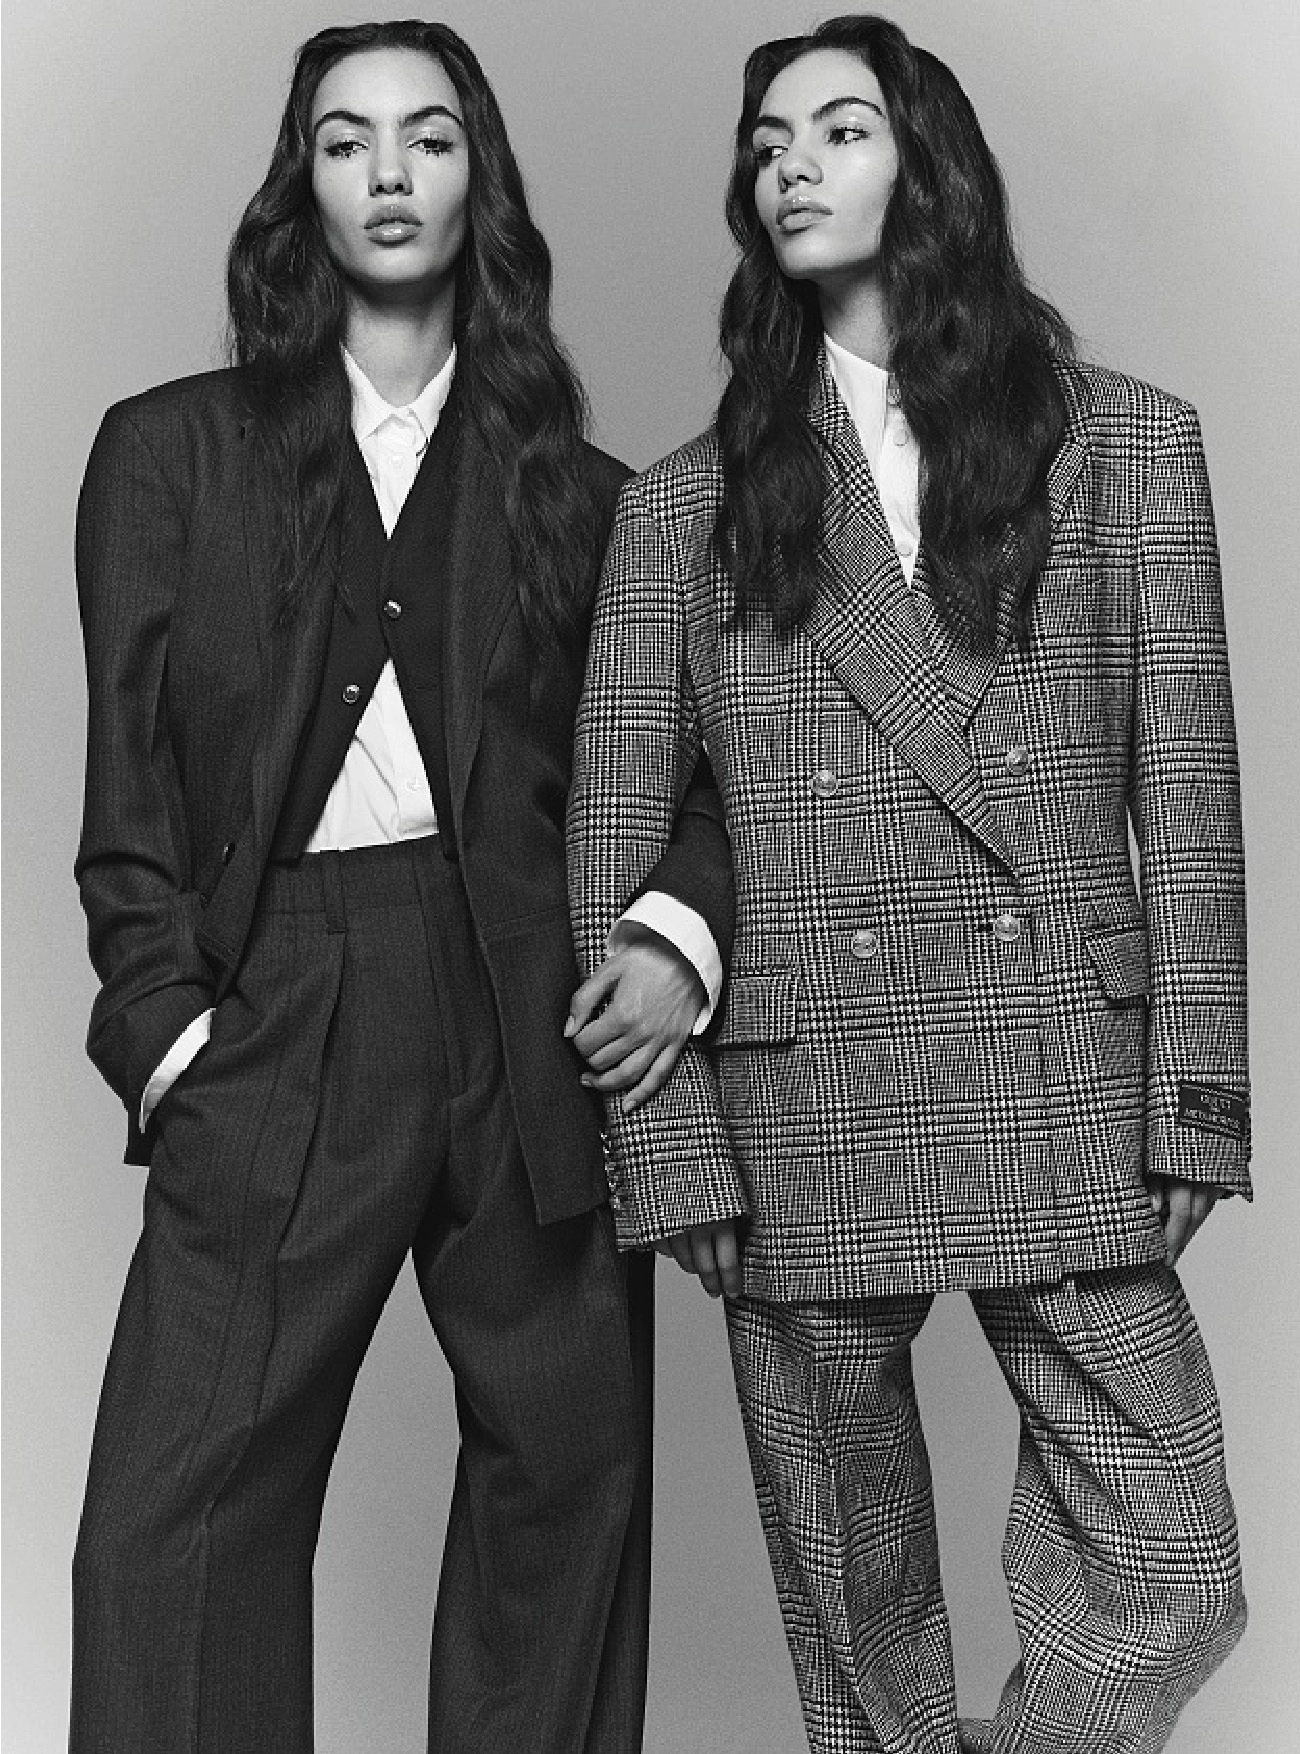 Sadhbh and Cadhla O'Reilly by Luca Bellumore for Amica Magazine September 2022